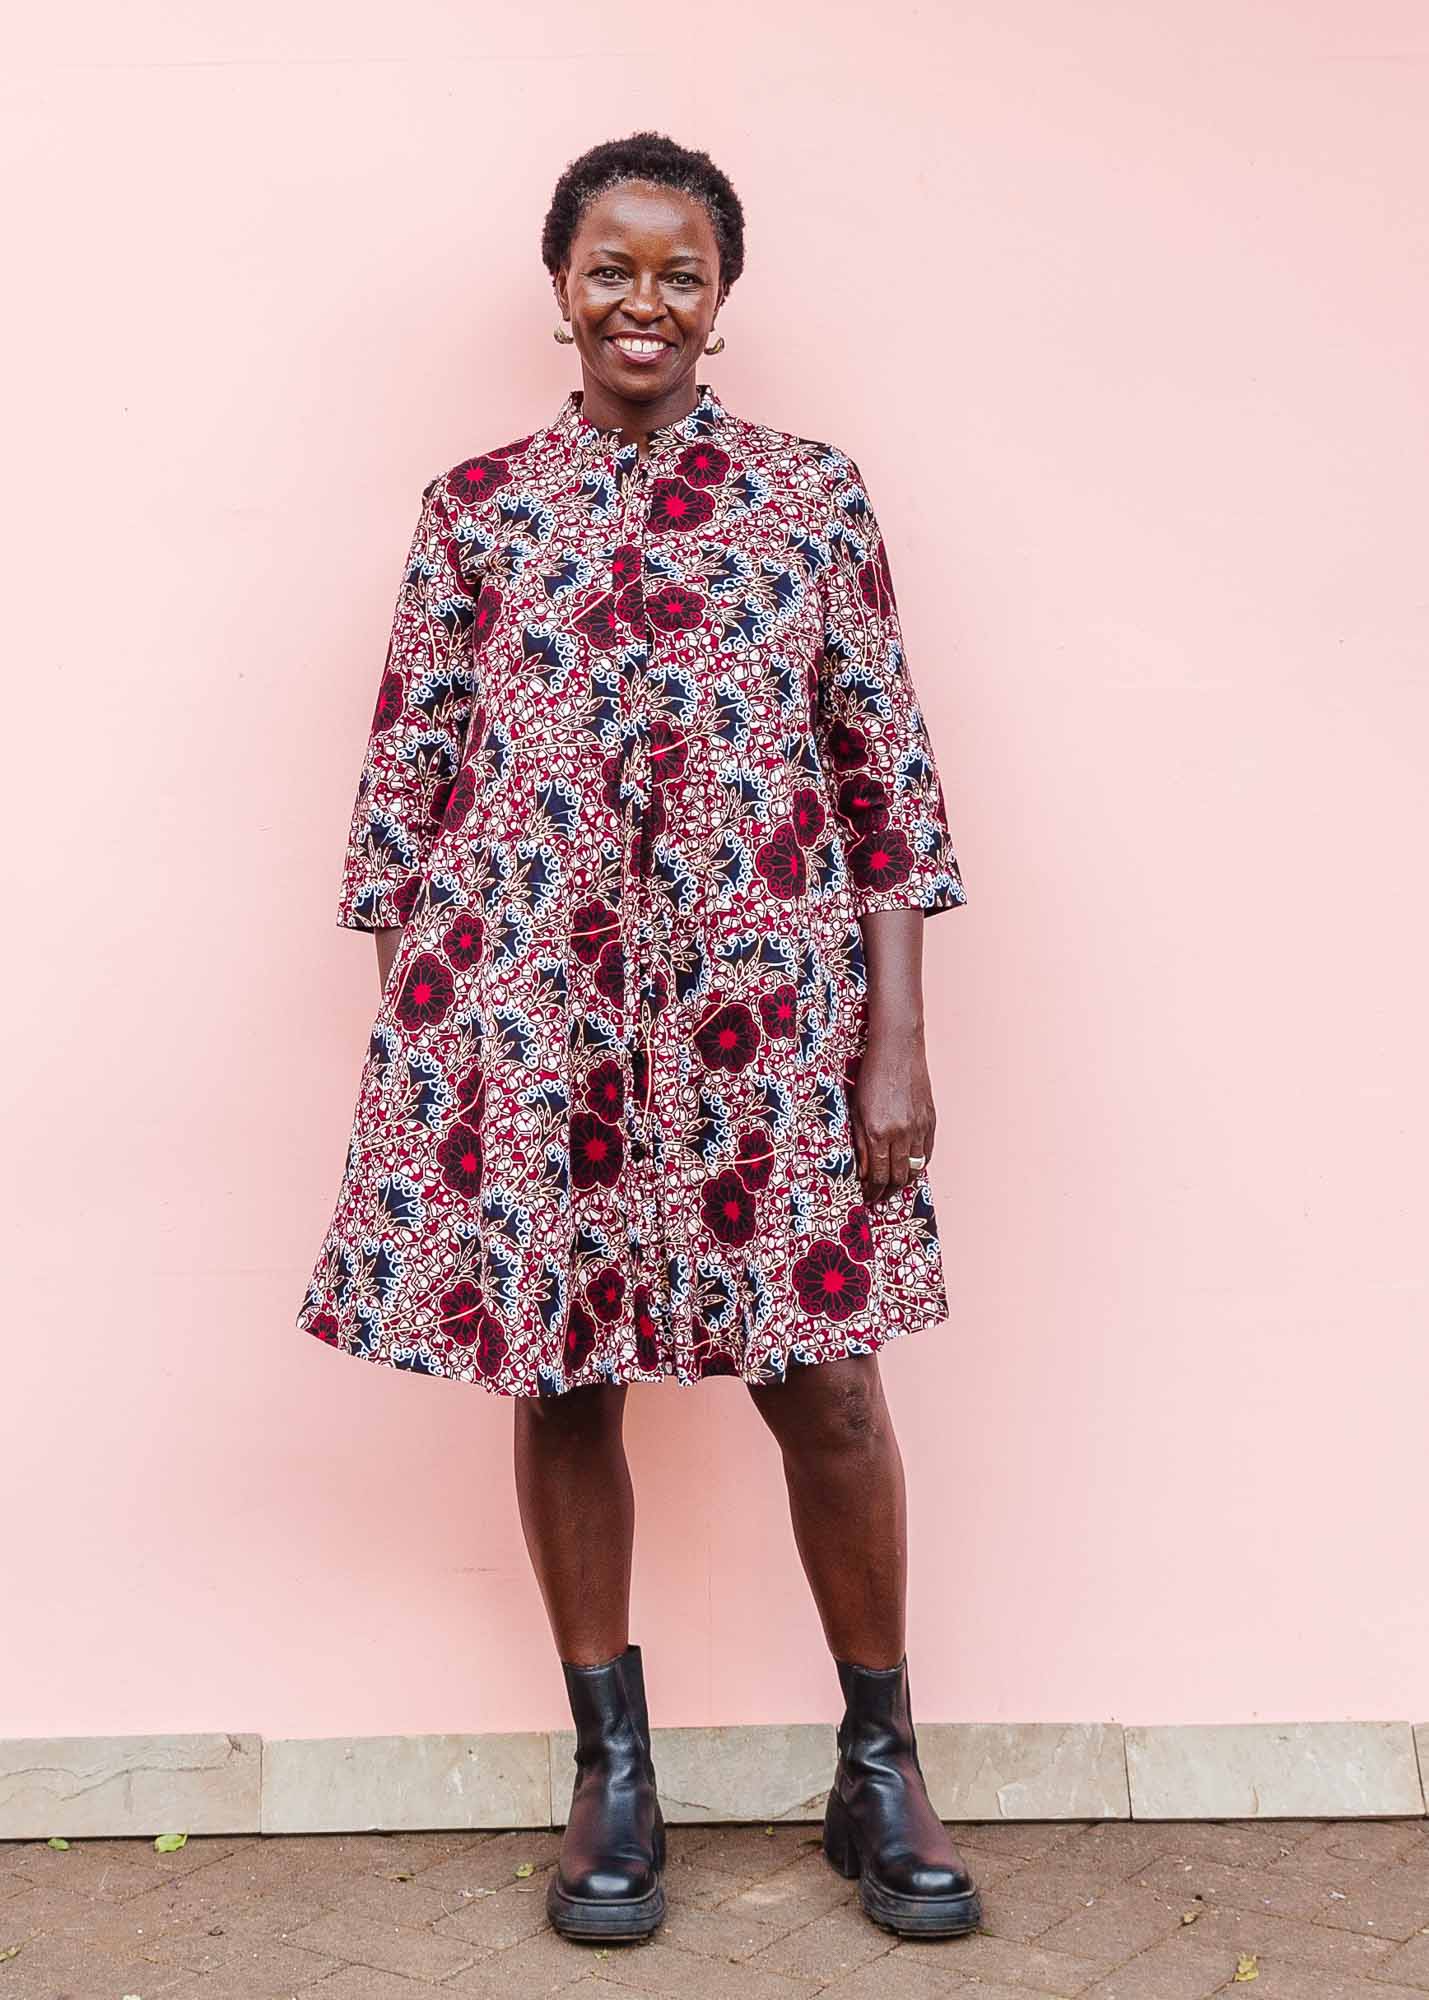 The model is wearing  Burgundy, white and navy blue floral print dress